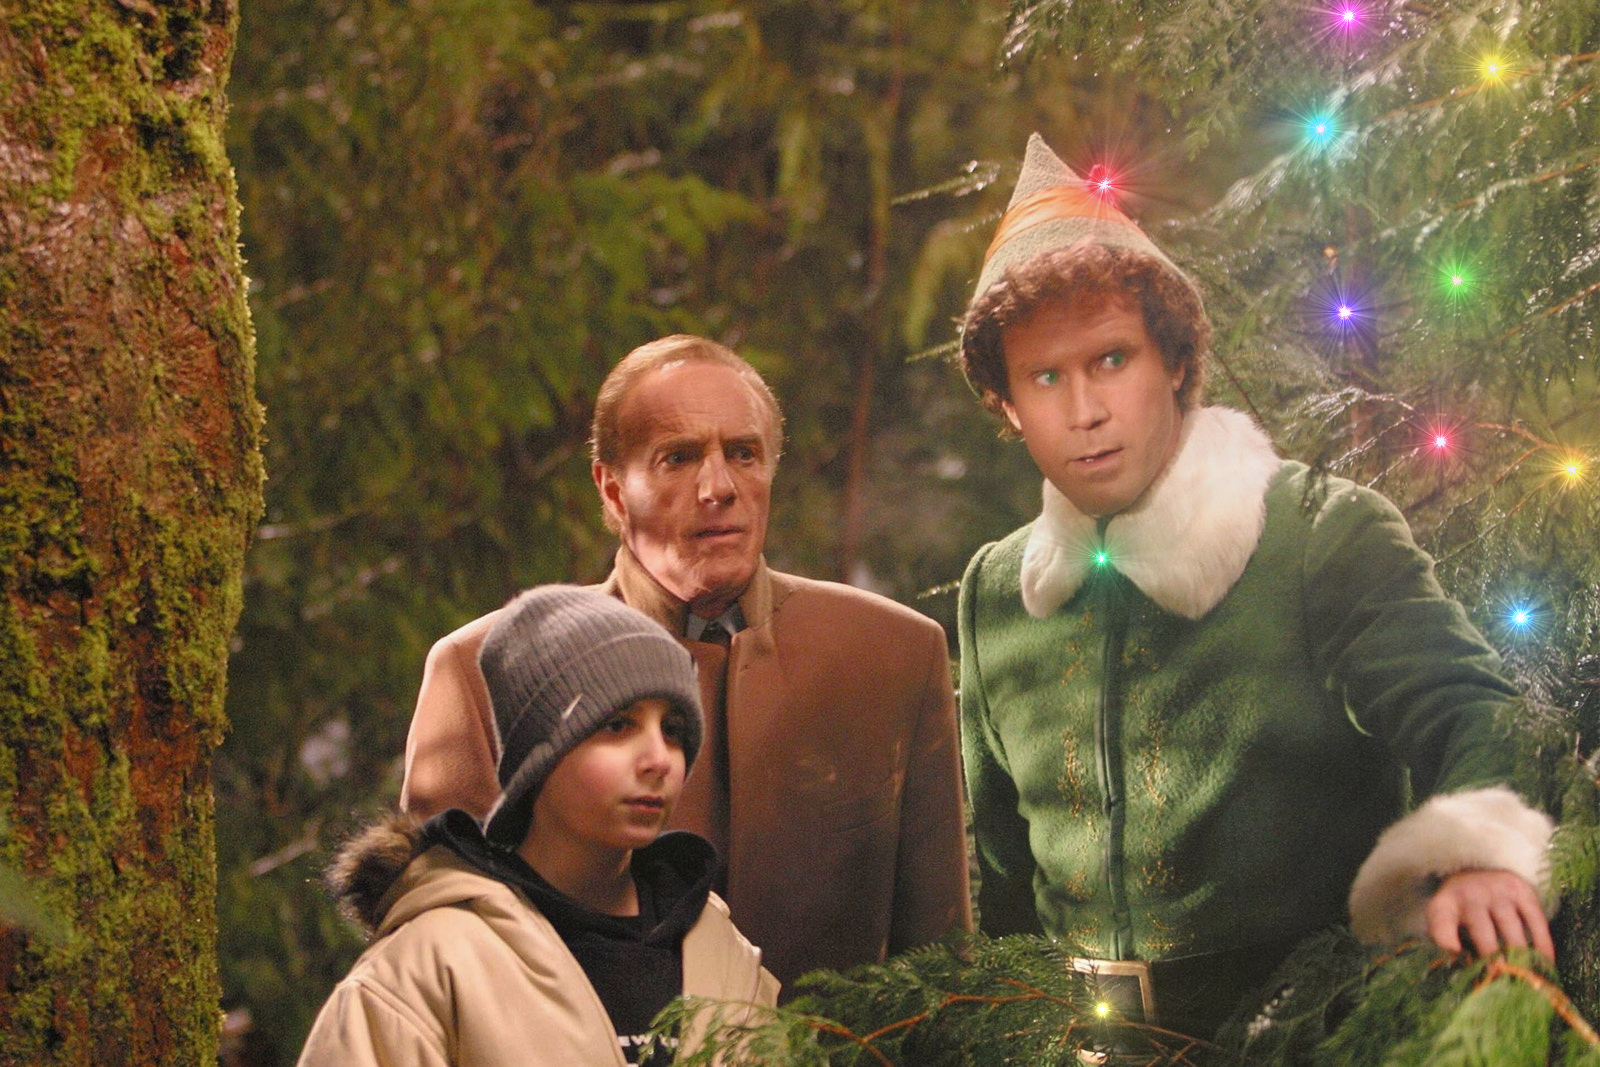 The Movie “Elf” Is Based On The True Story Of Sandy The Human Elf